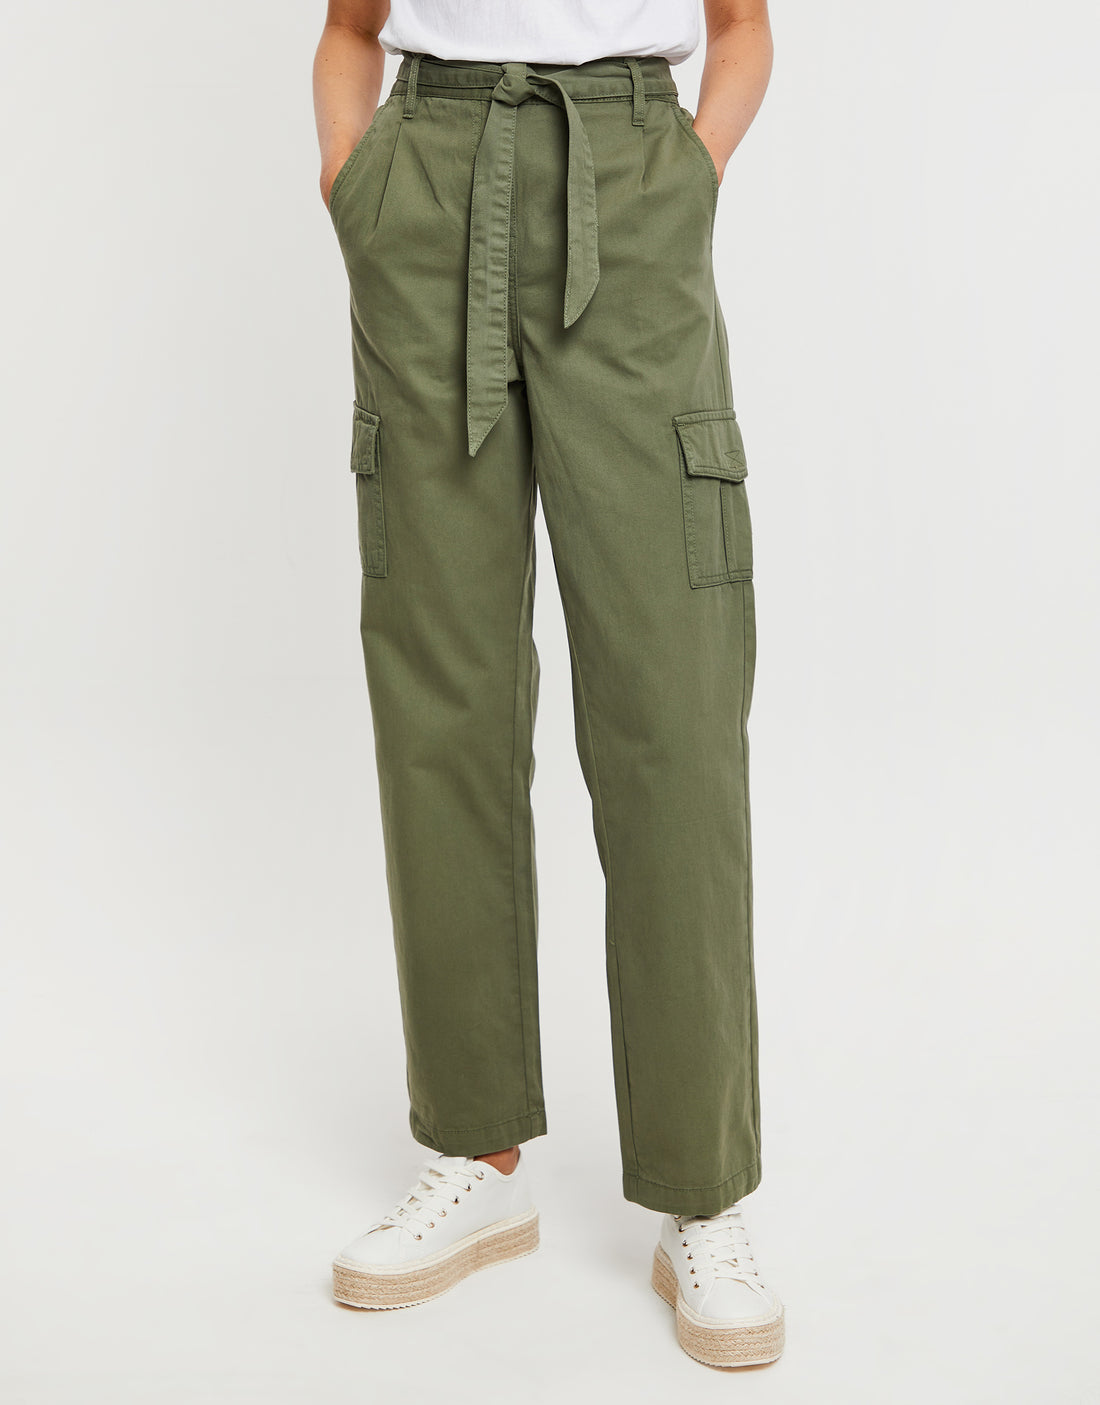 Women's High-rise Pleat Front Tapered Chino Pants - A New Day™ Tan 18 :  Target